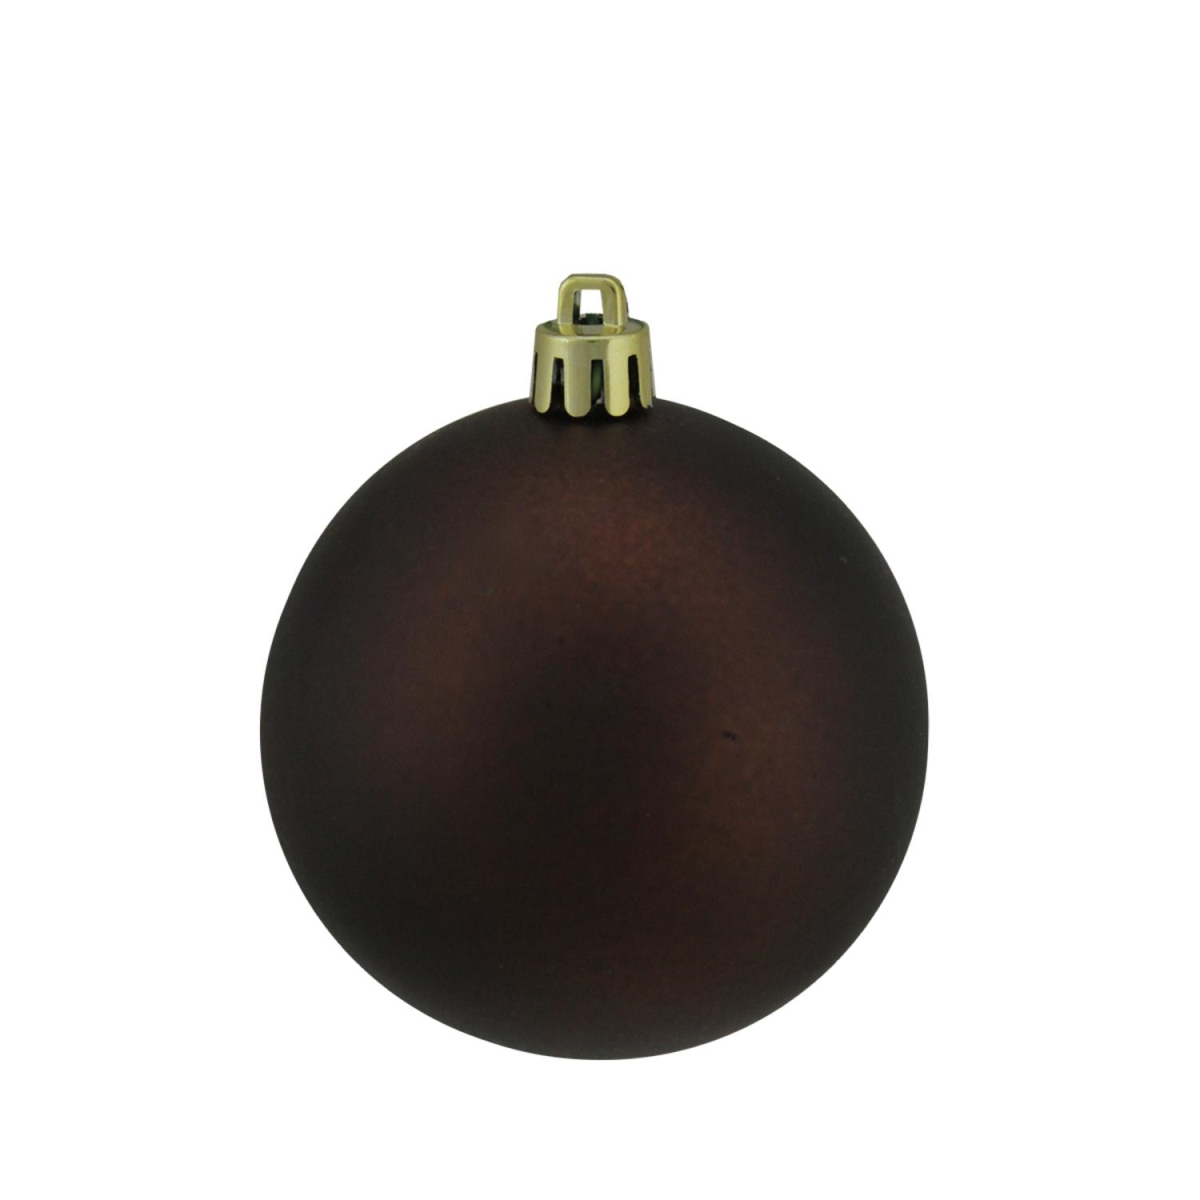 31749131 Matte Copper Uv Resistant Commercial Drilled Shatterproof Christmas Ball Ornament - 2.75 In.